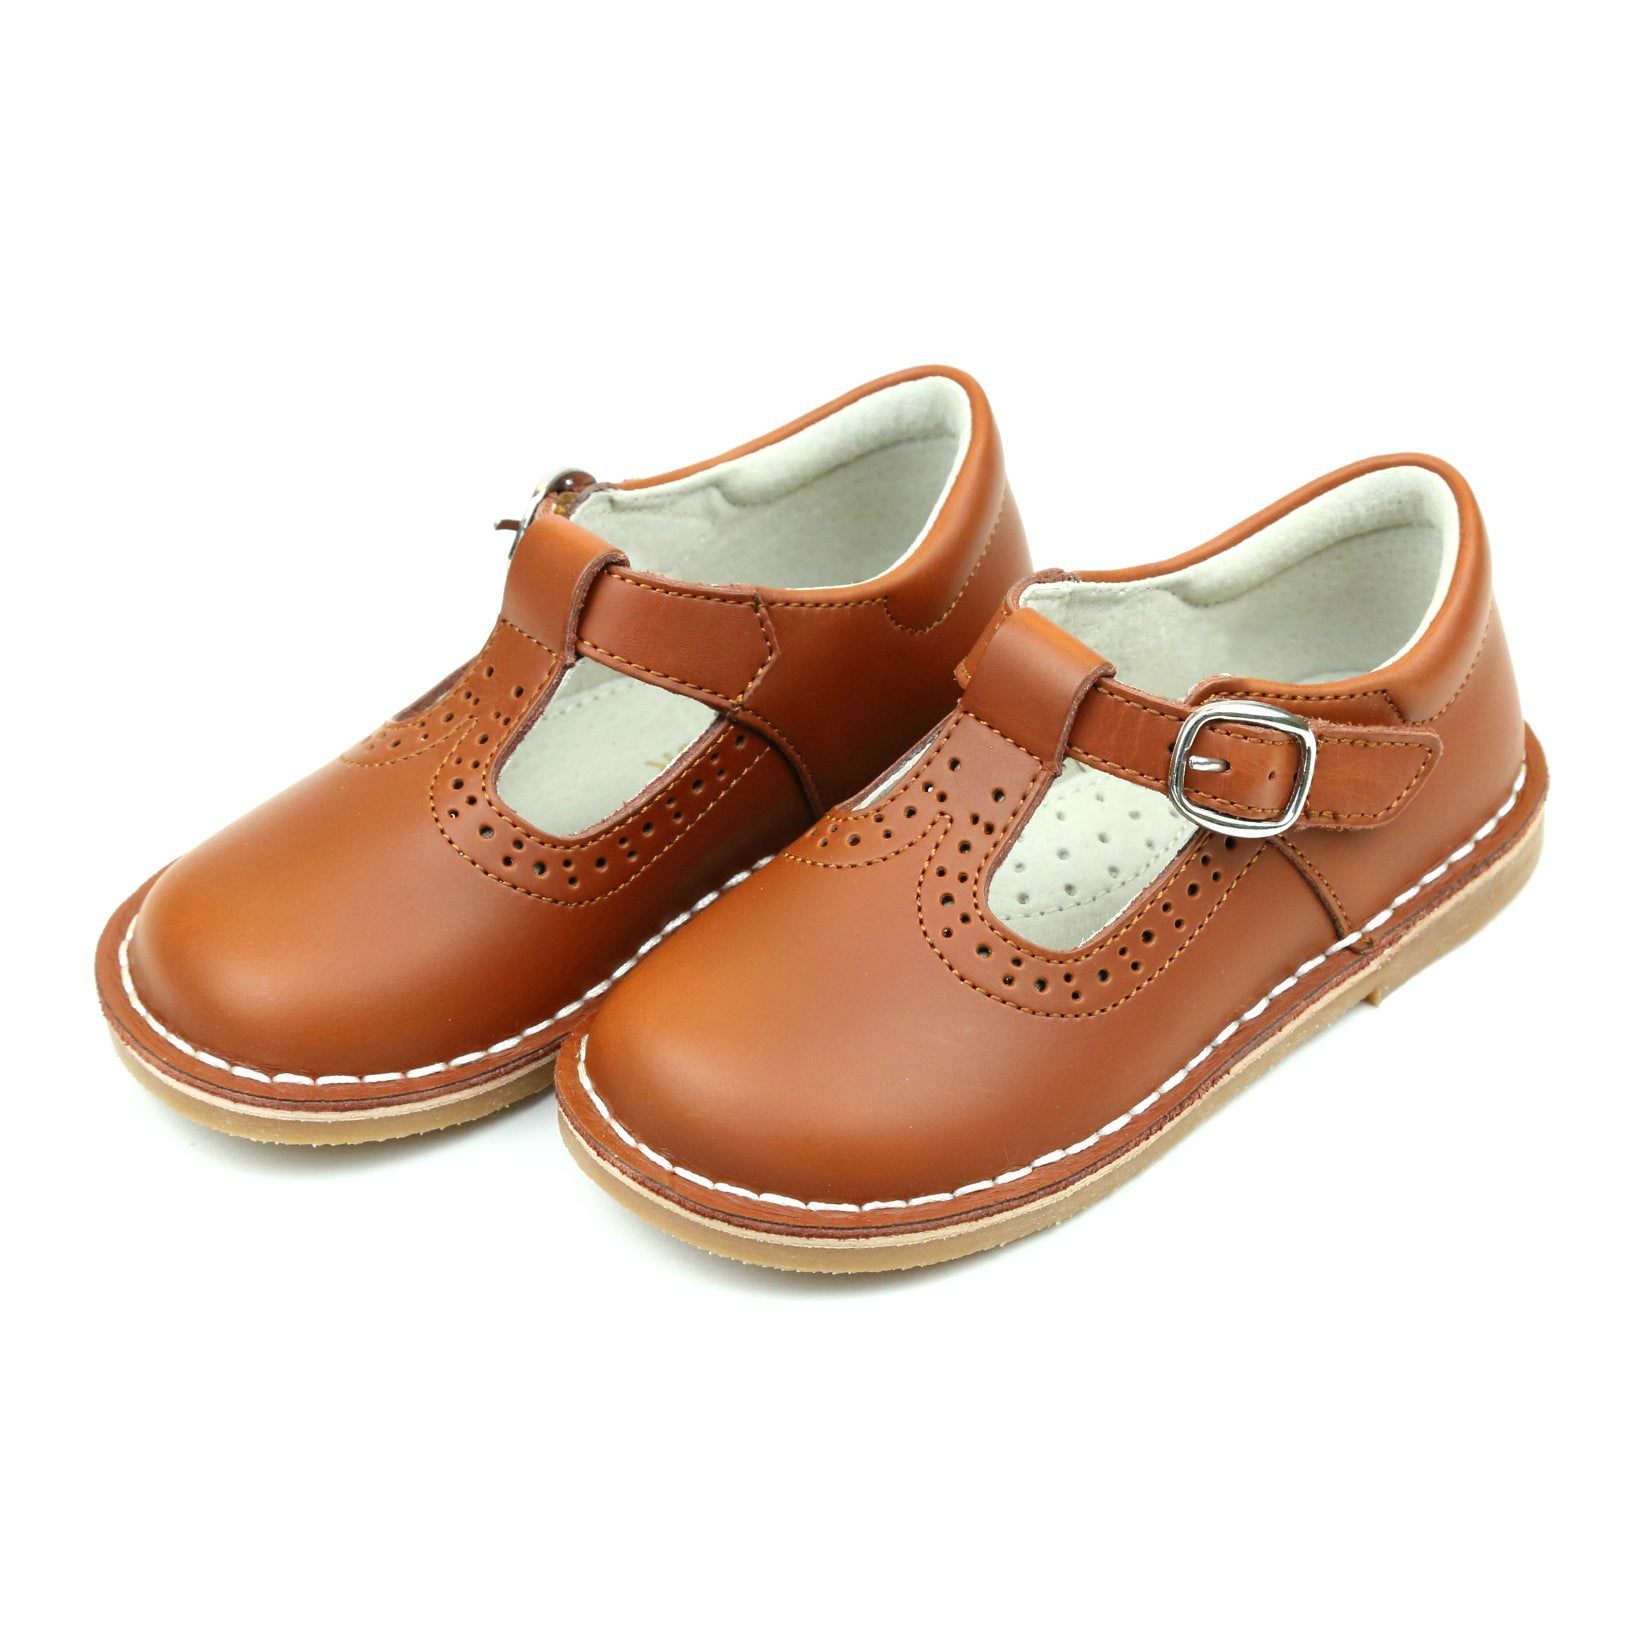 L'Amour Frances Cognac T-Strap Perforated Mary Jane Mary Janes